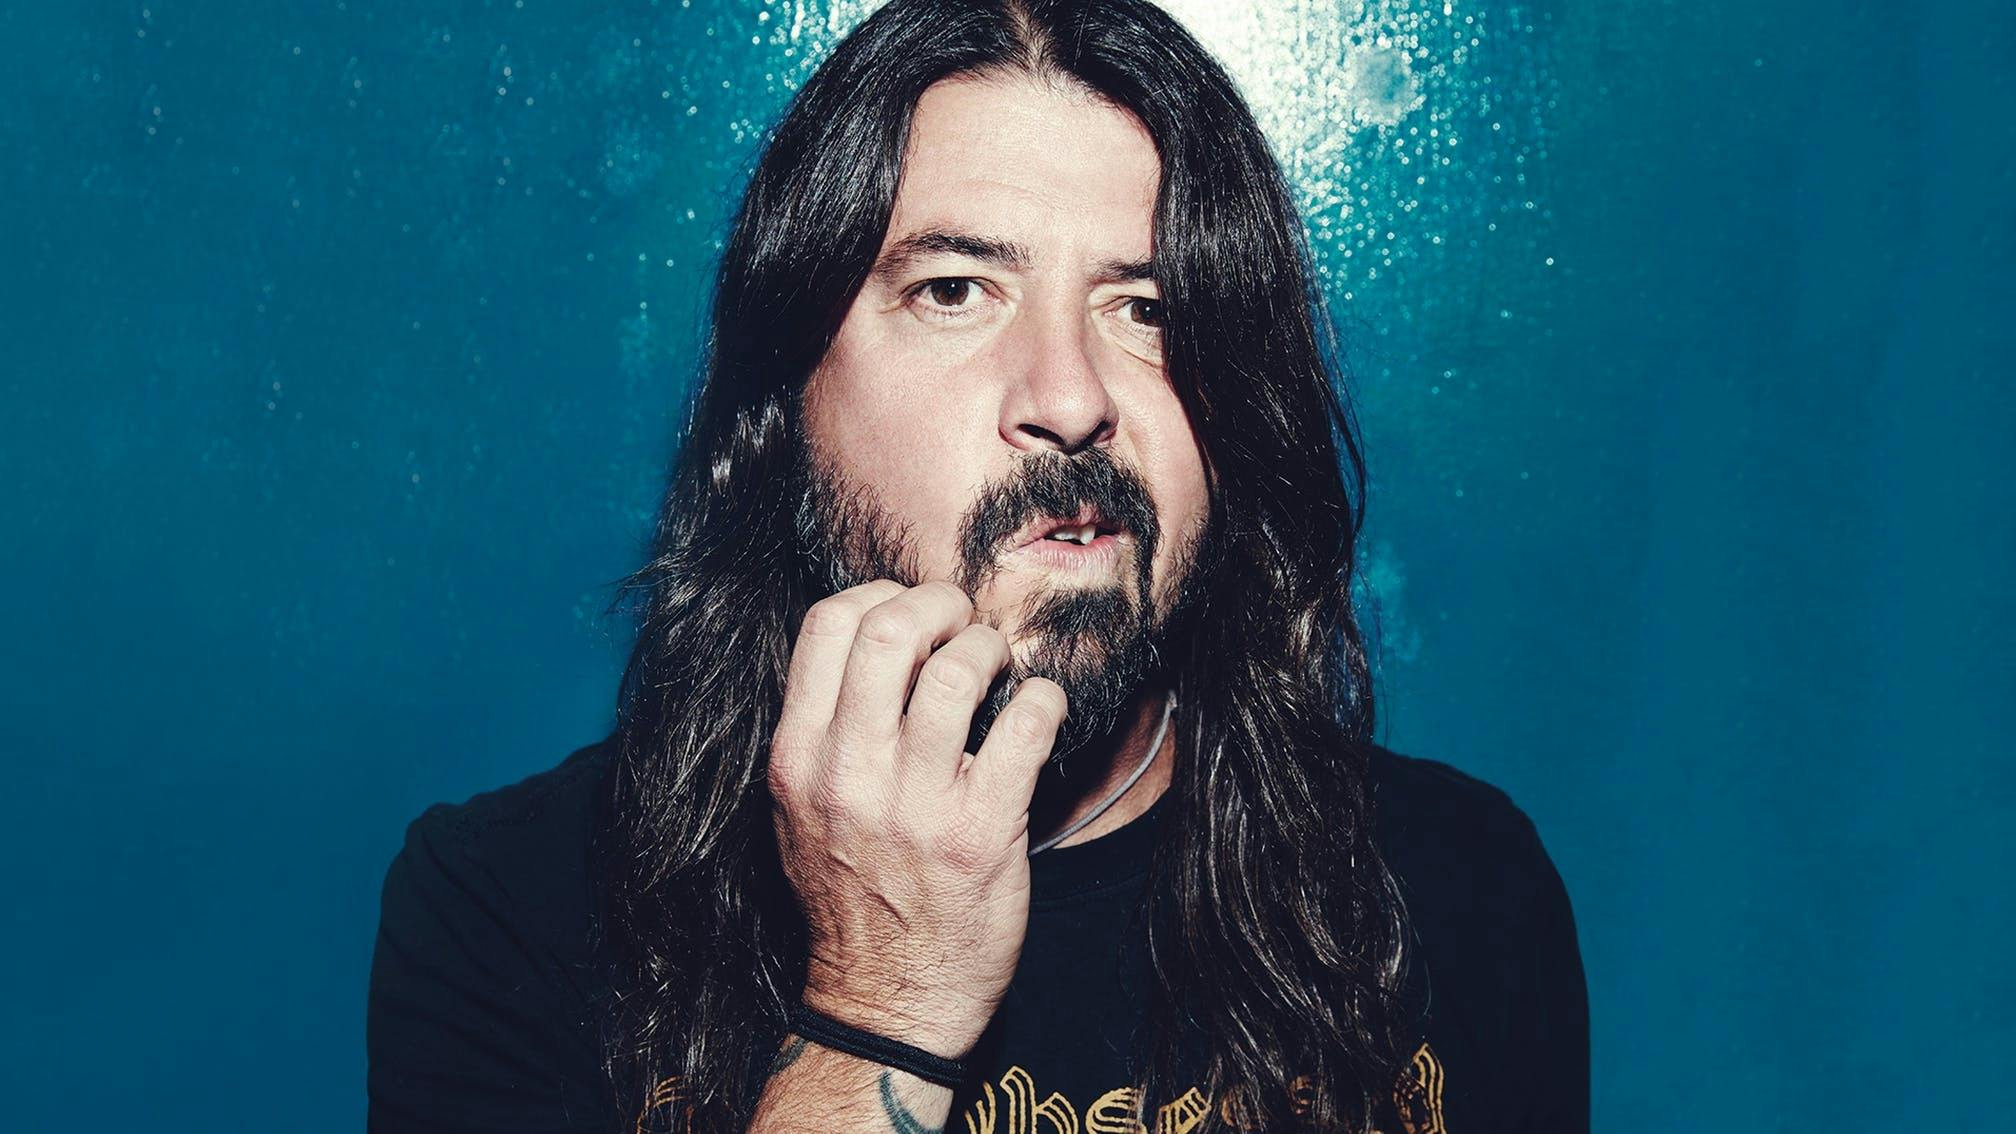 Dave Grohl, Nine Inch Nails and more to play benefit show VetsAid 2022